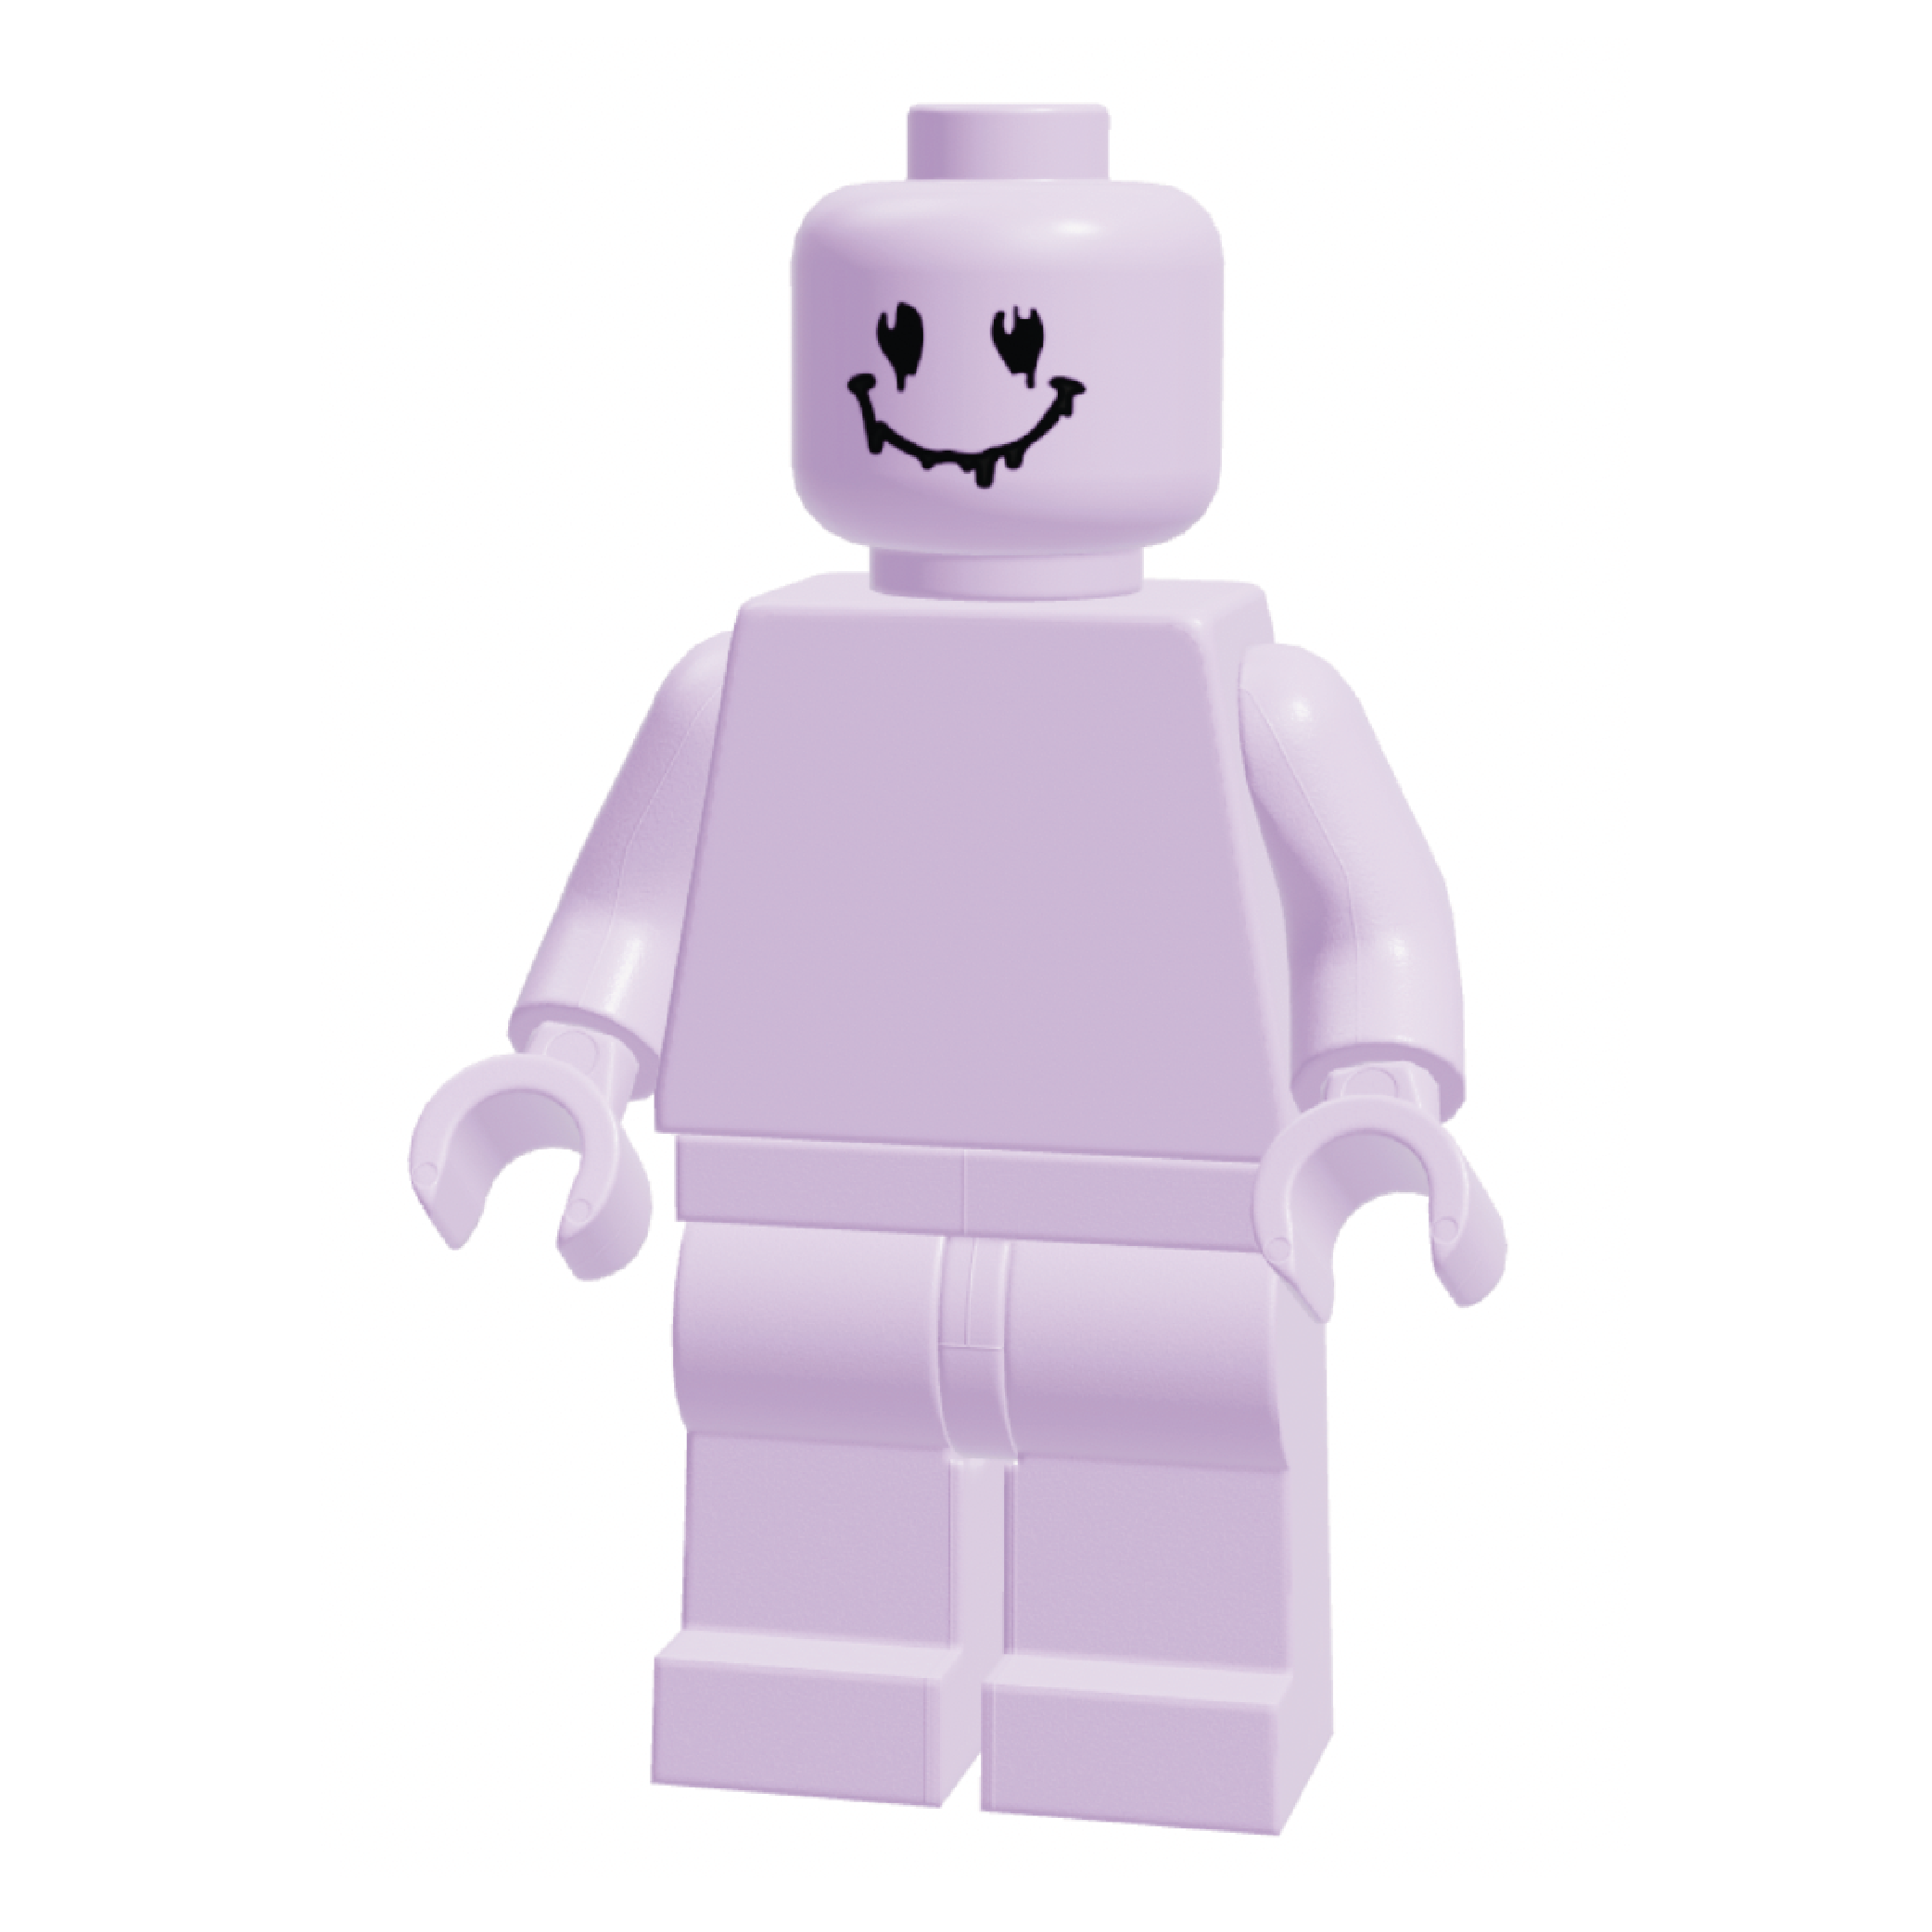 Here it is: the full purple LEGO Classic Space minifigure